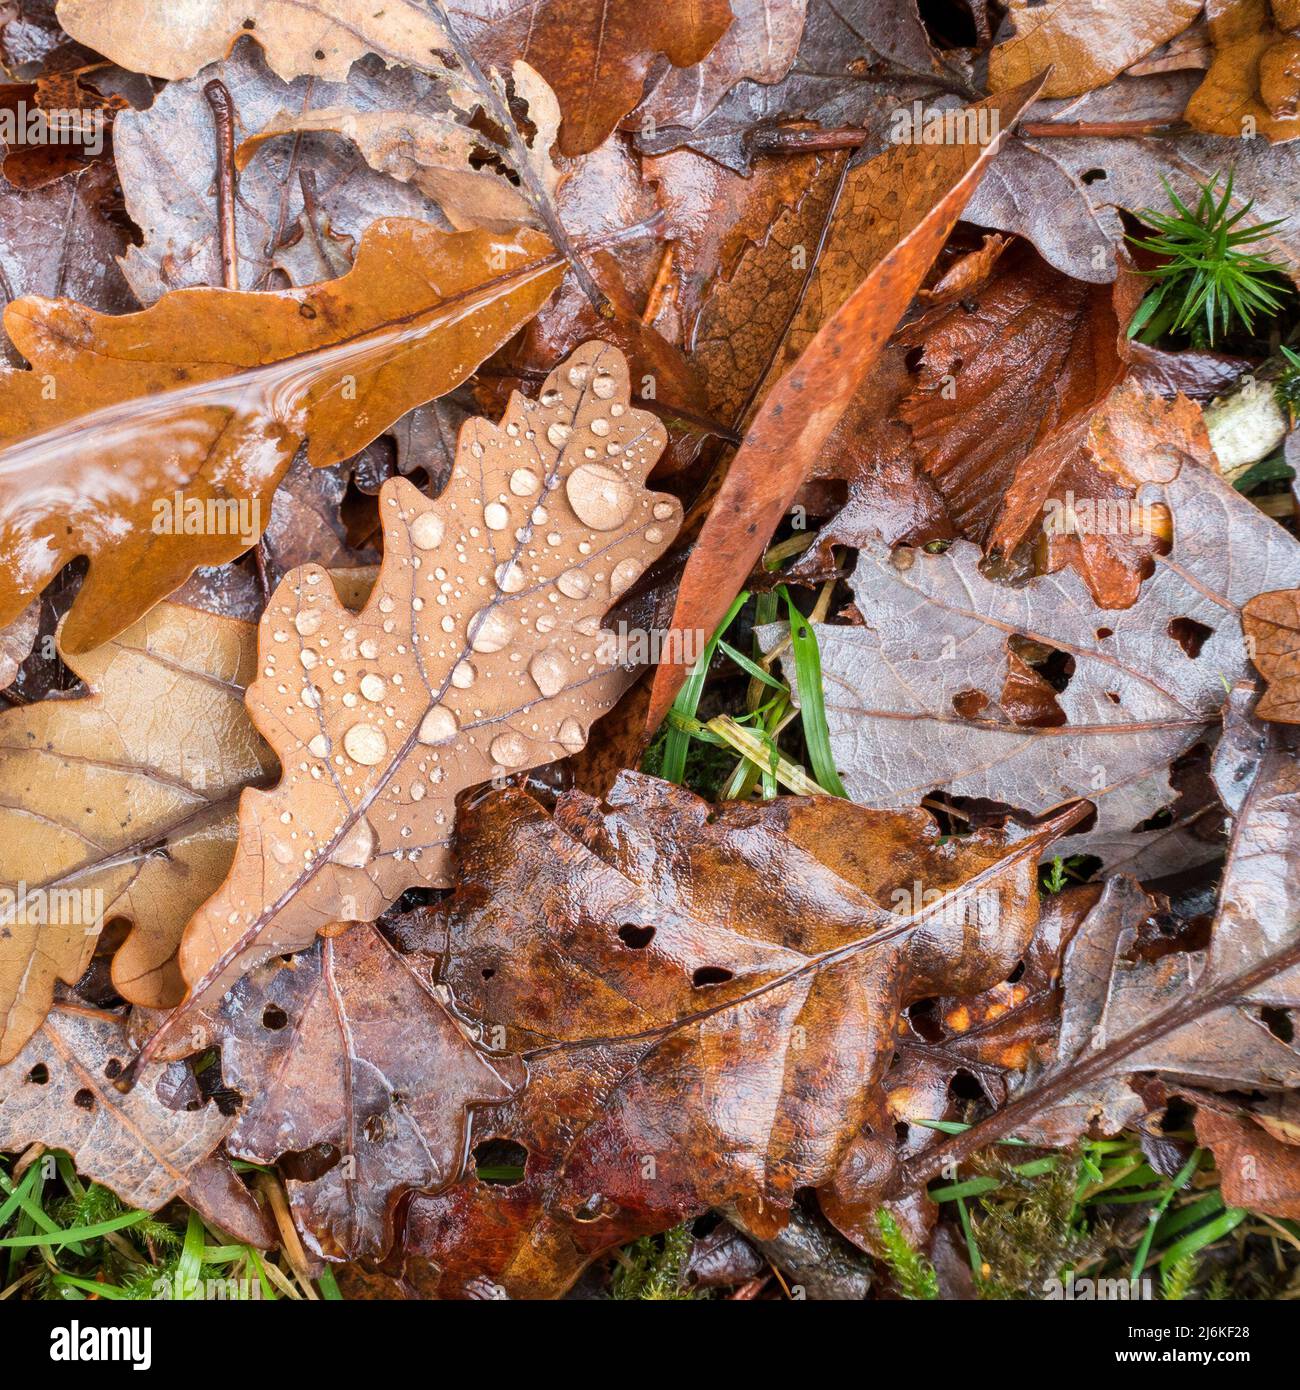 Closeup of fallen, wet, brown and bronze Autumn leaves with water droplets in November. Stock Photo